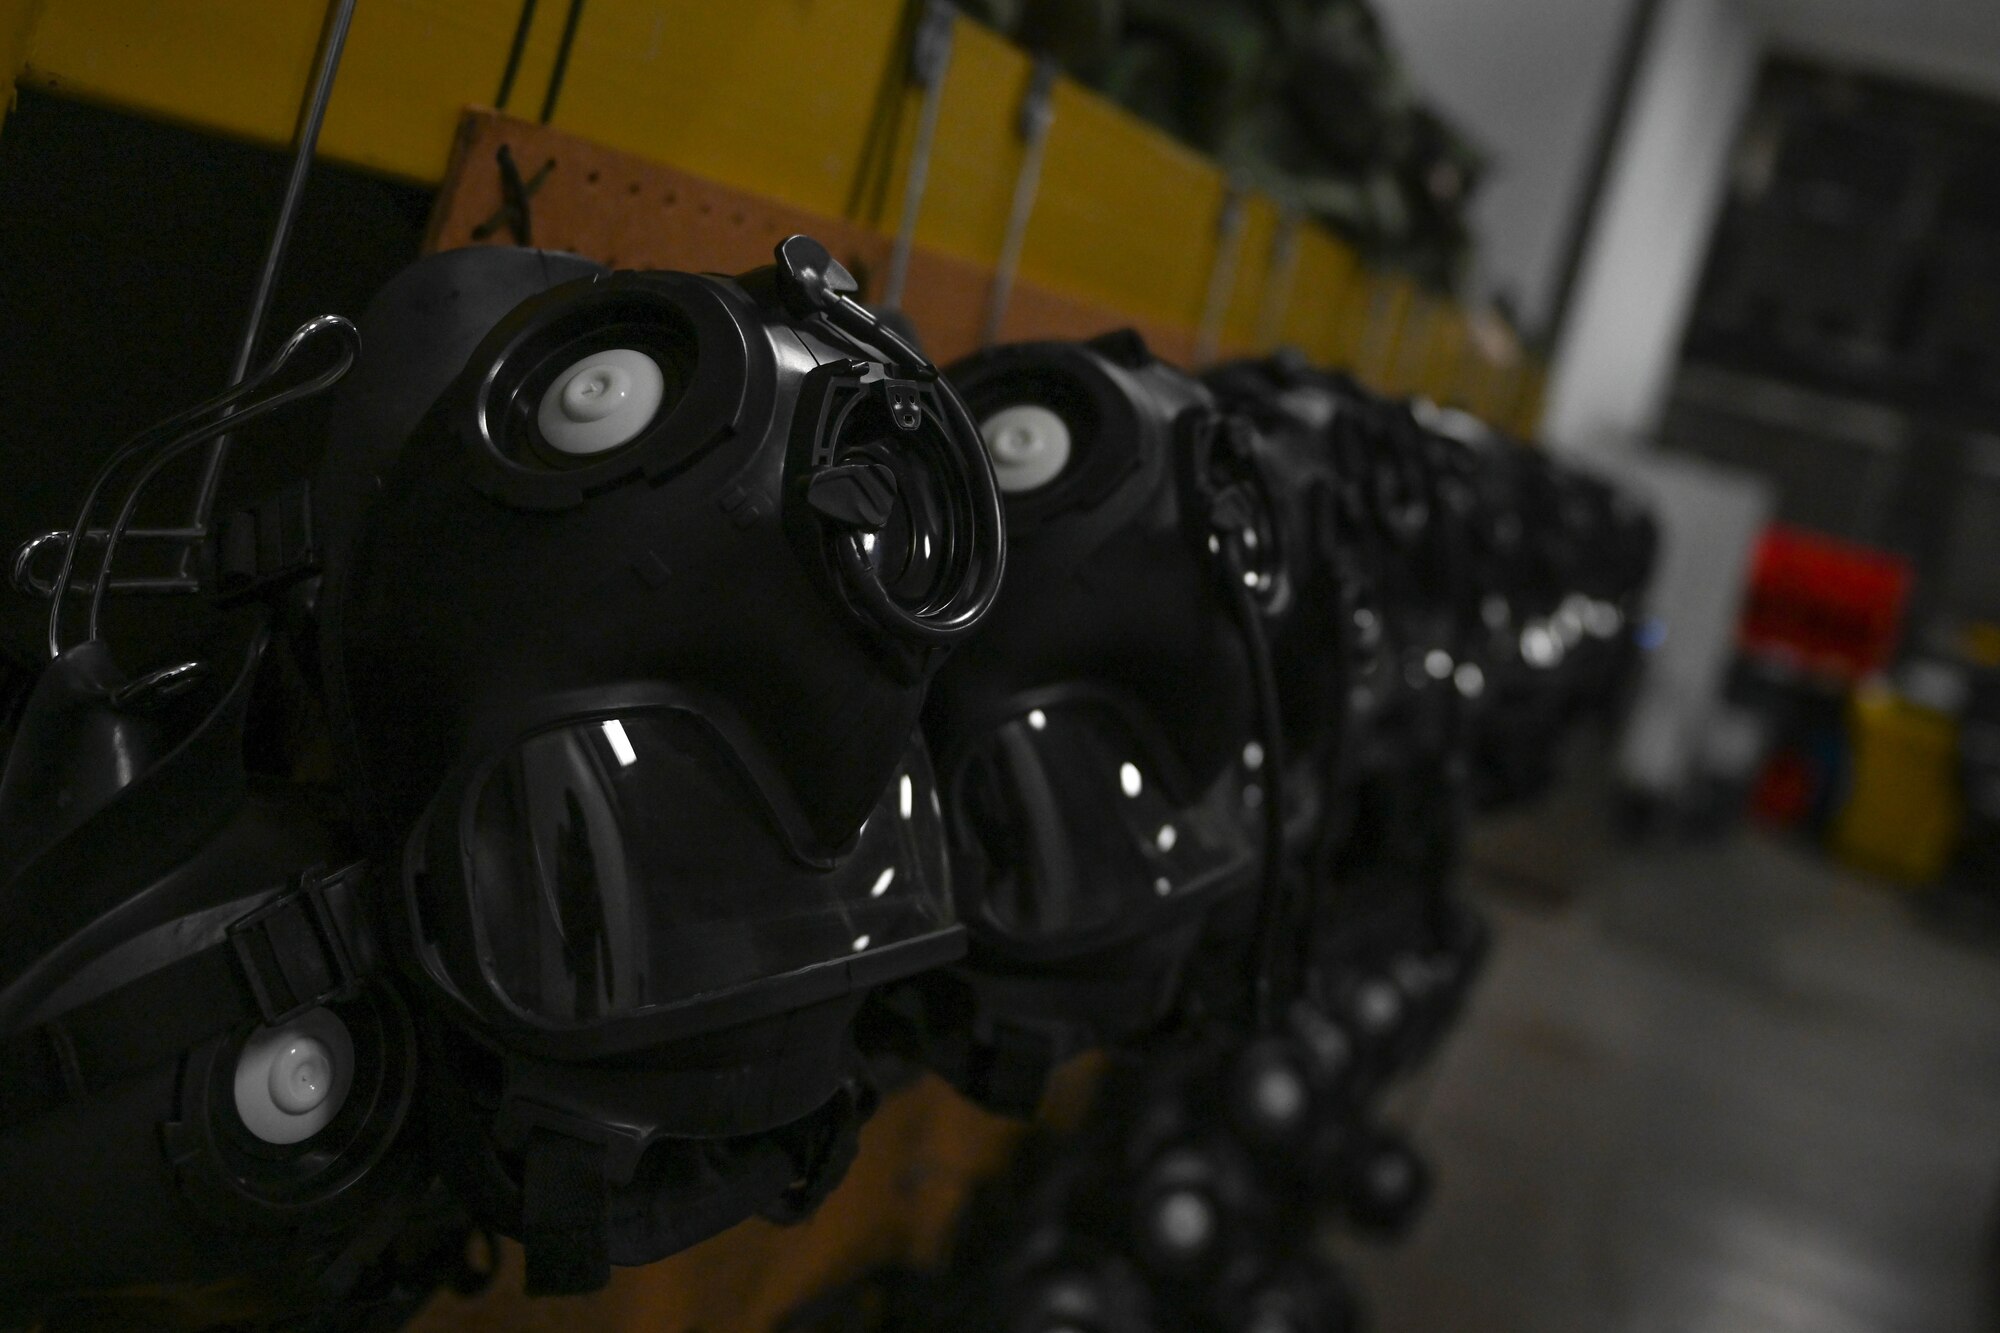 A row of gas masks hang on hooks.